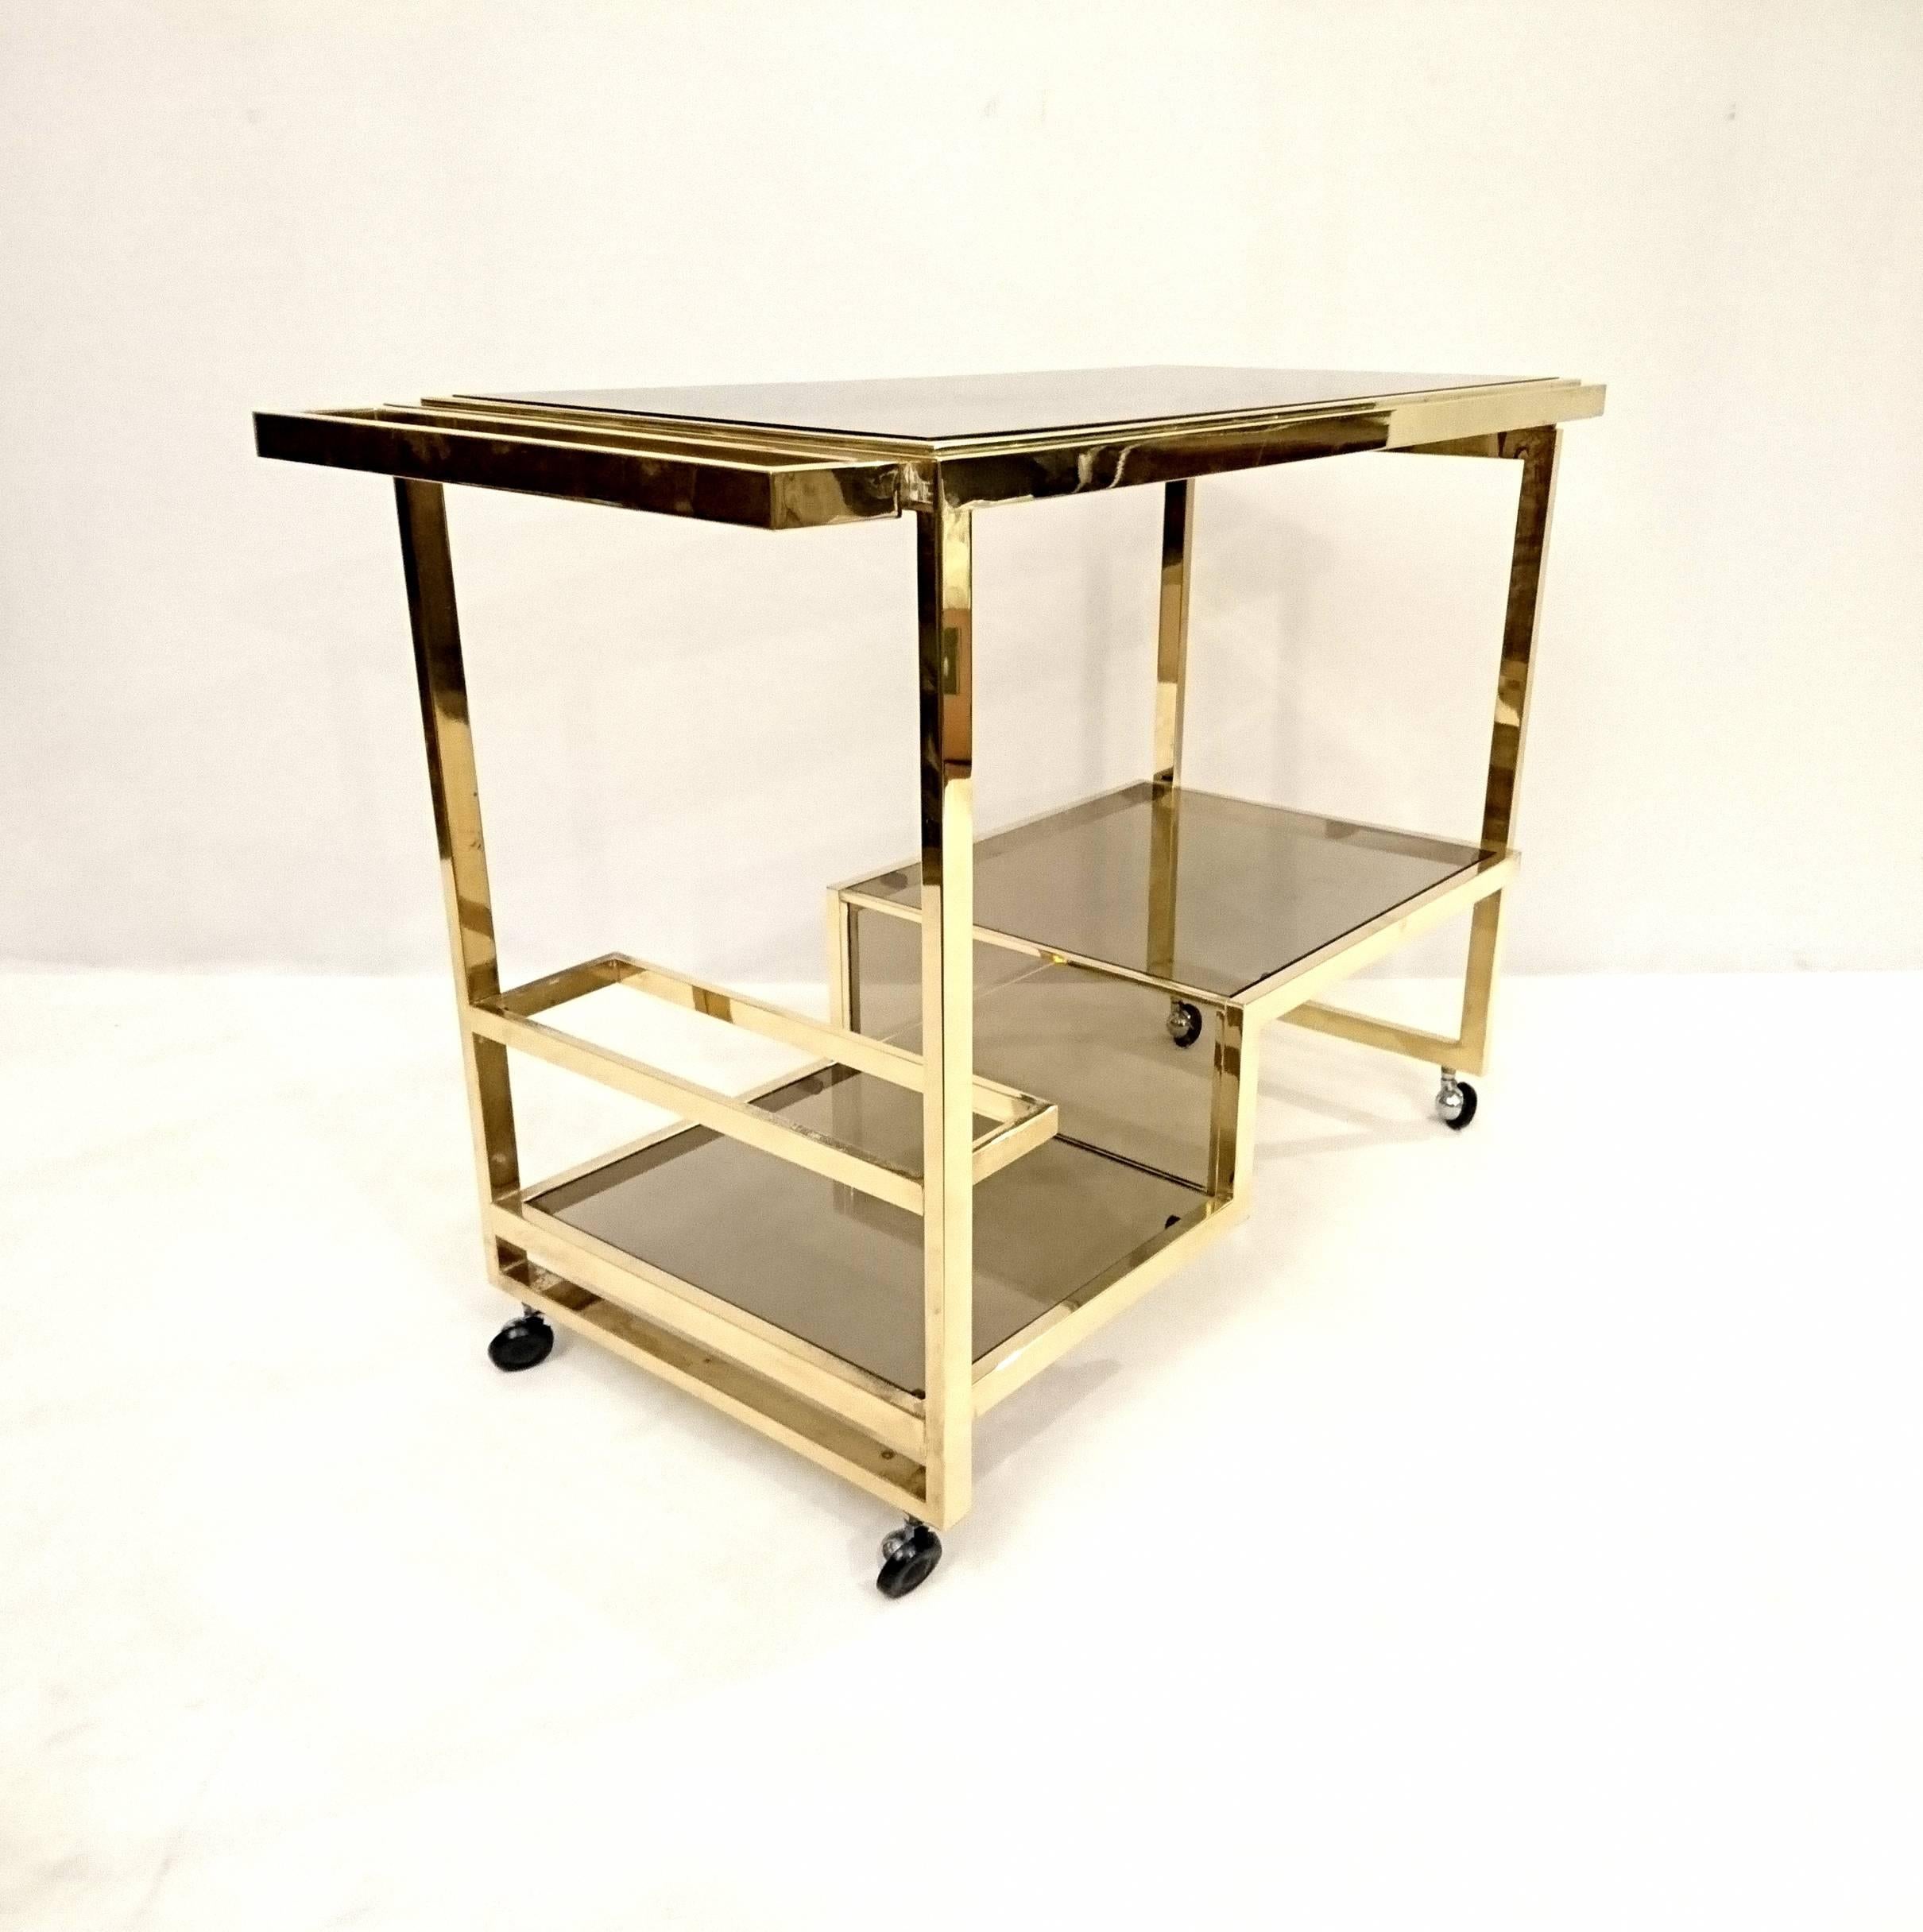 Elegant and solid bar trolley in full brass and smoked glass. Marked Nazaret on the glass. Original wheels in excellent working order.